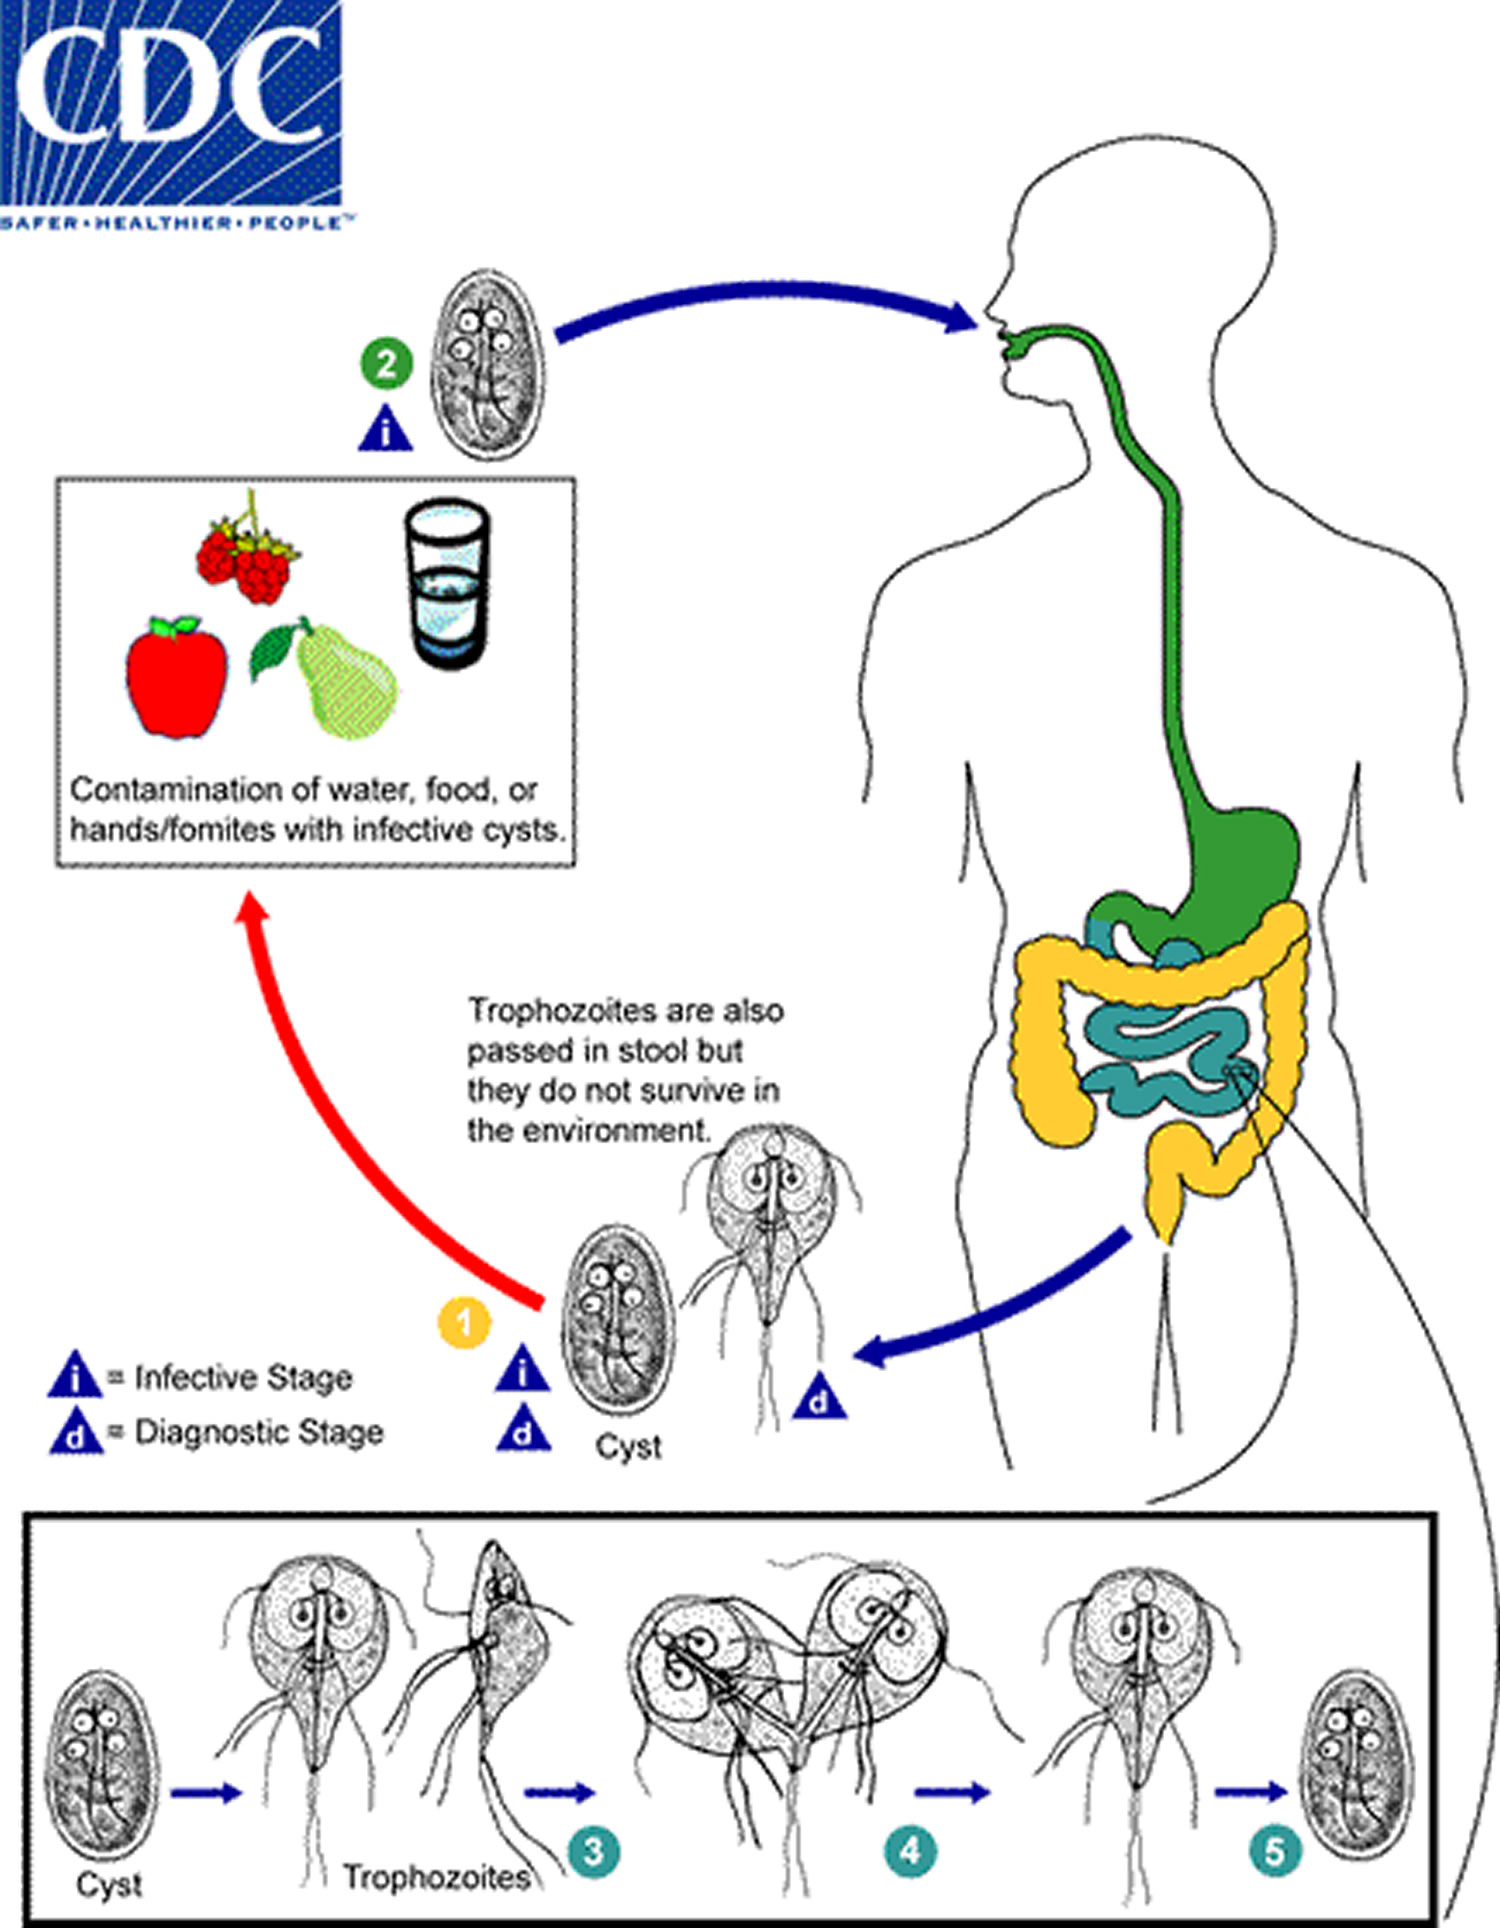 How to treat giardia in humans naturally - Giardia treatment humans naturally